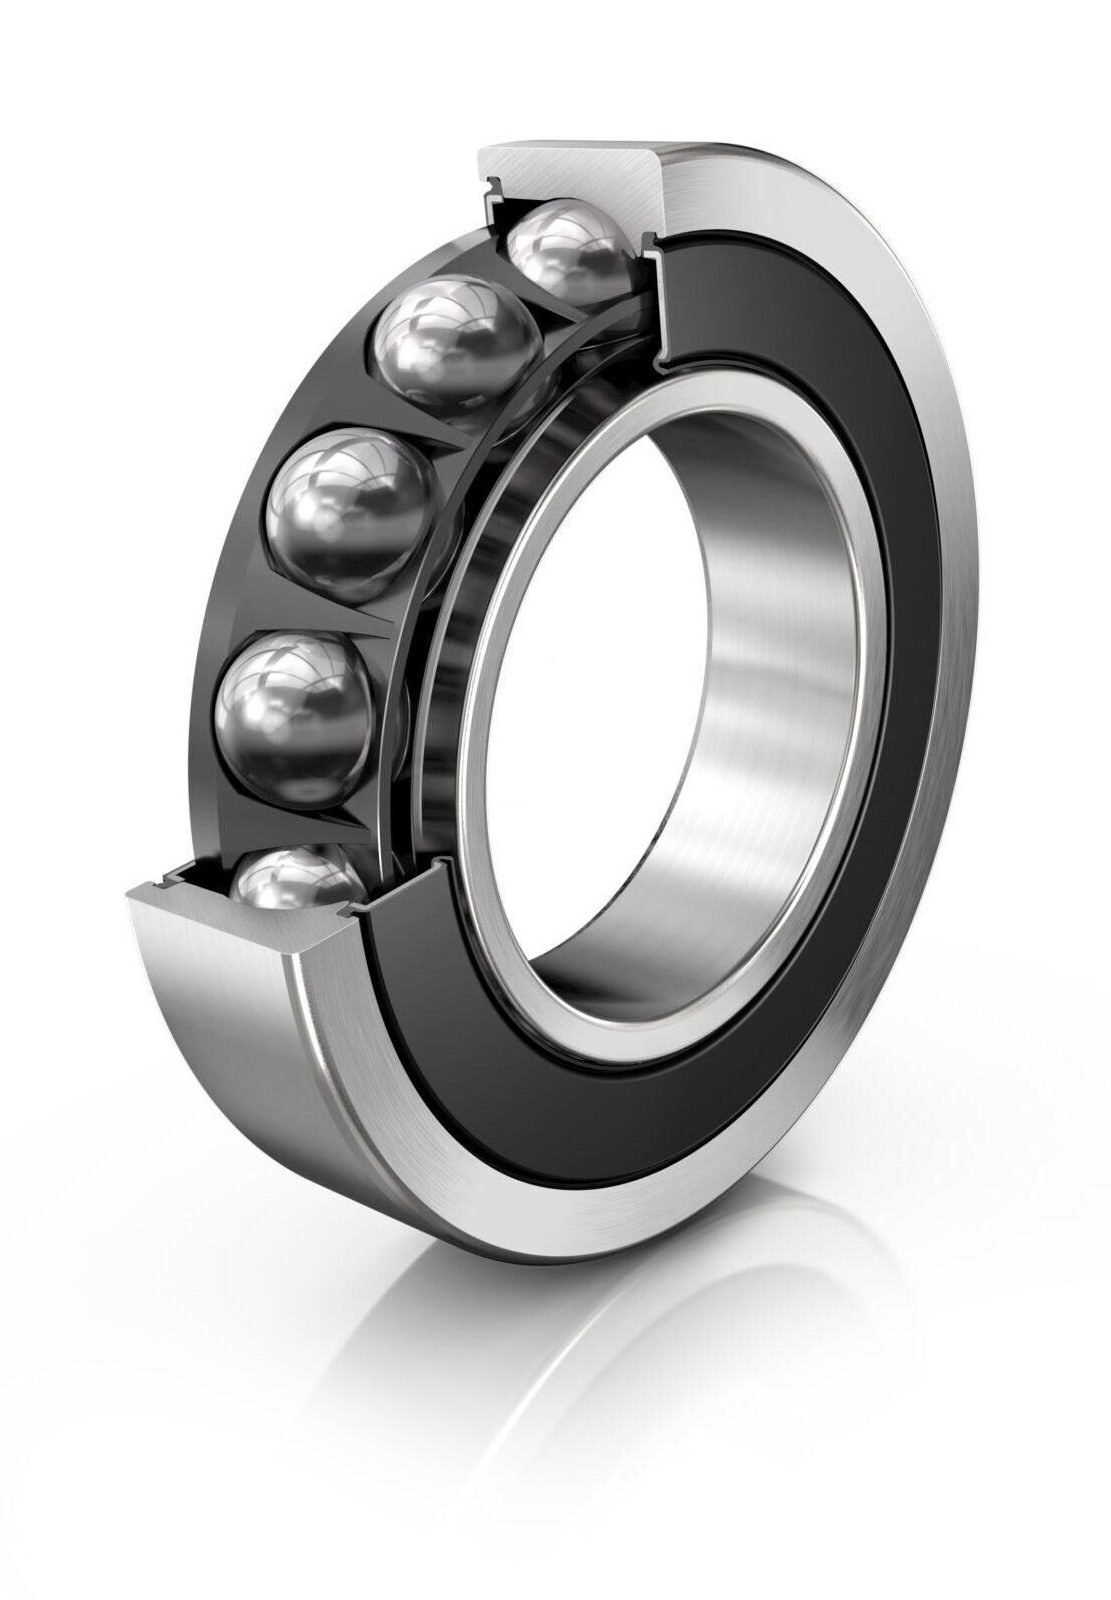 Angular ball bearing with single row and plastic cage. Partial cross-section shown of balls and raceways.